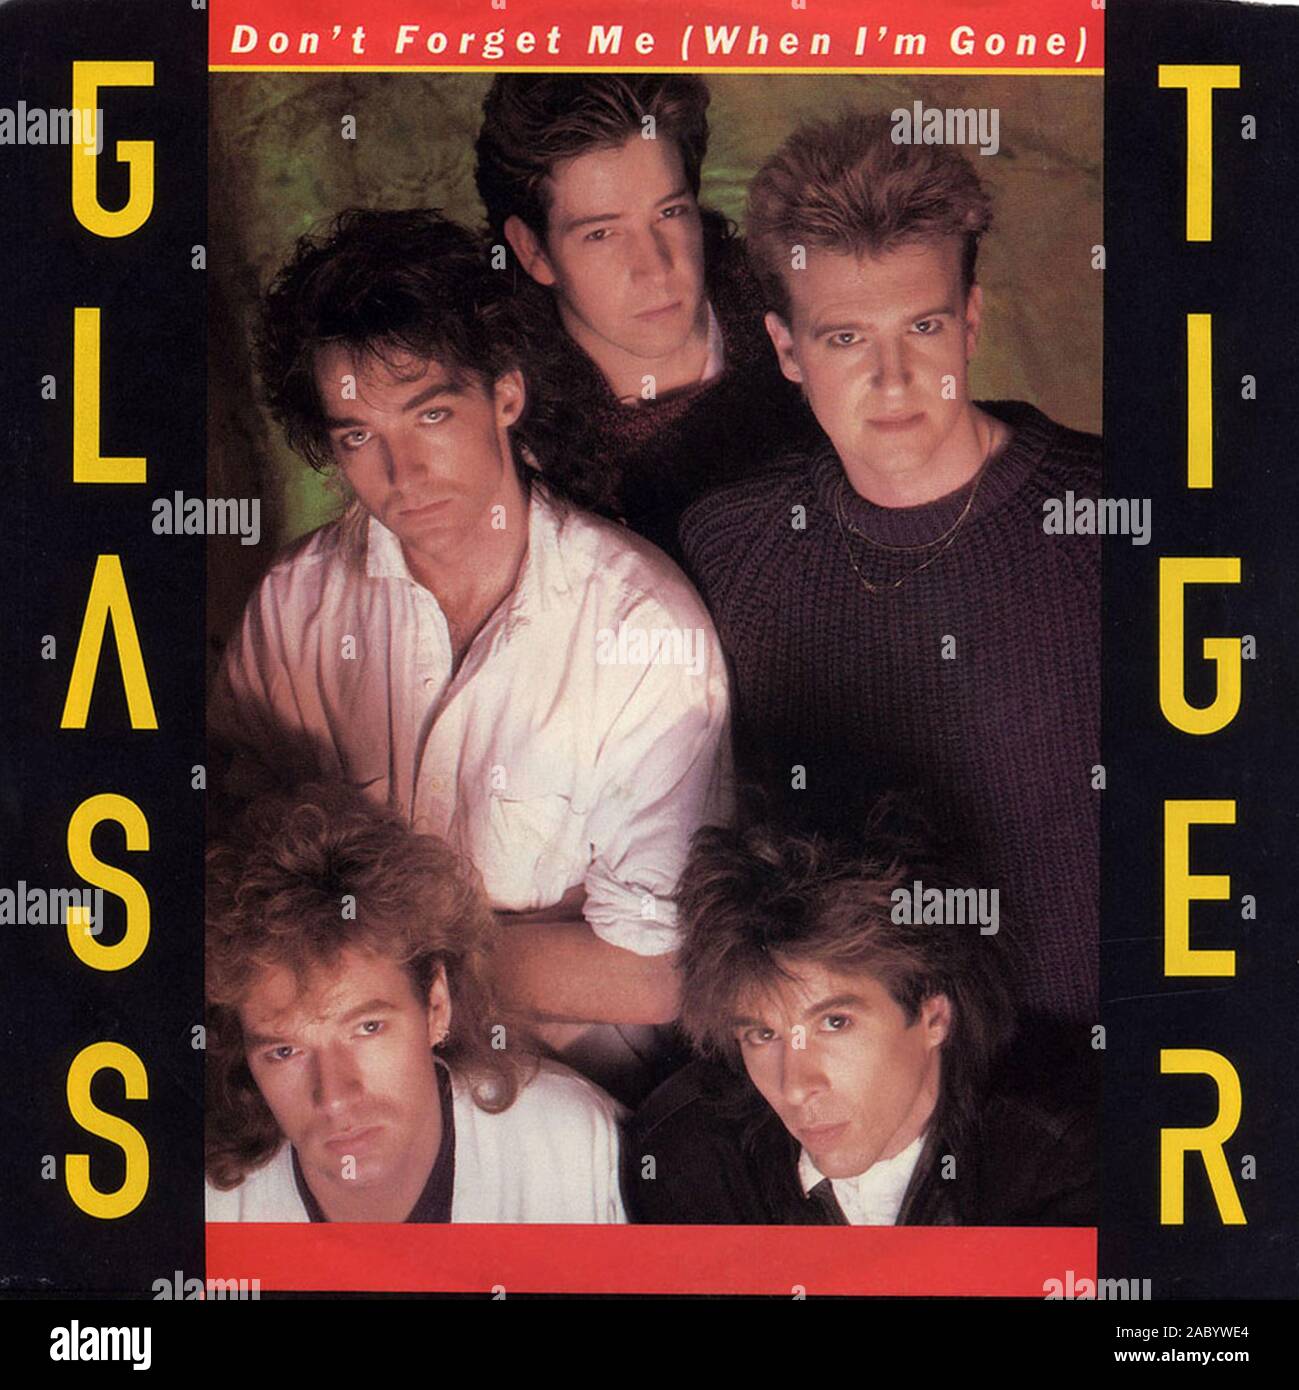 Glass Tiger - Don't Forget Me (When I'm Gone)   - Vintage vinyl album cover Stock Photo